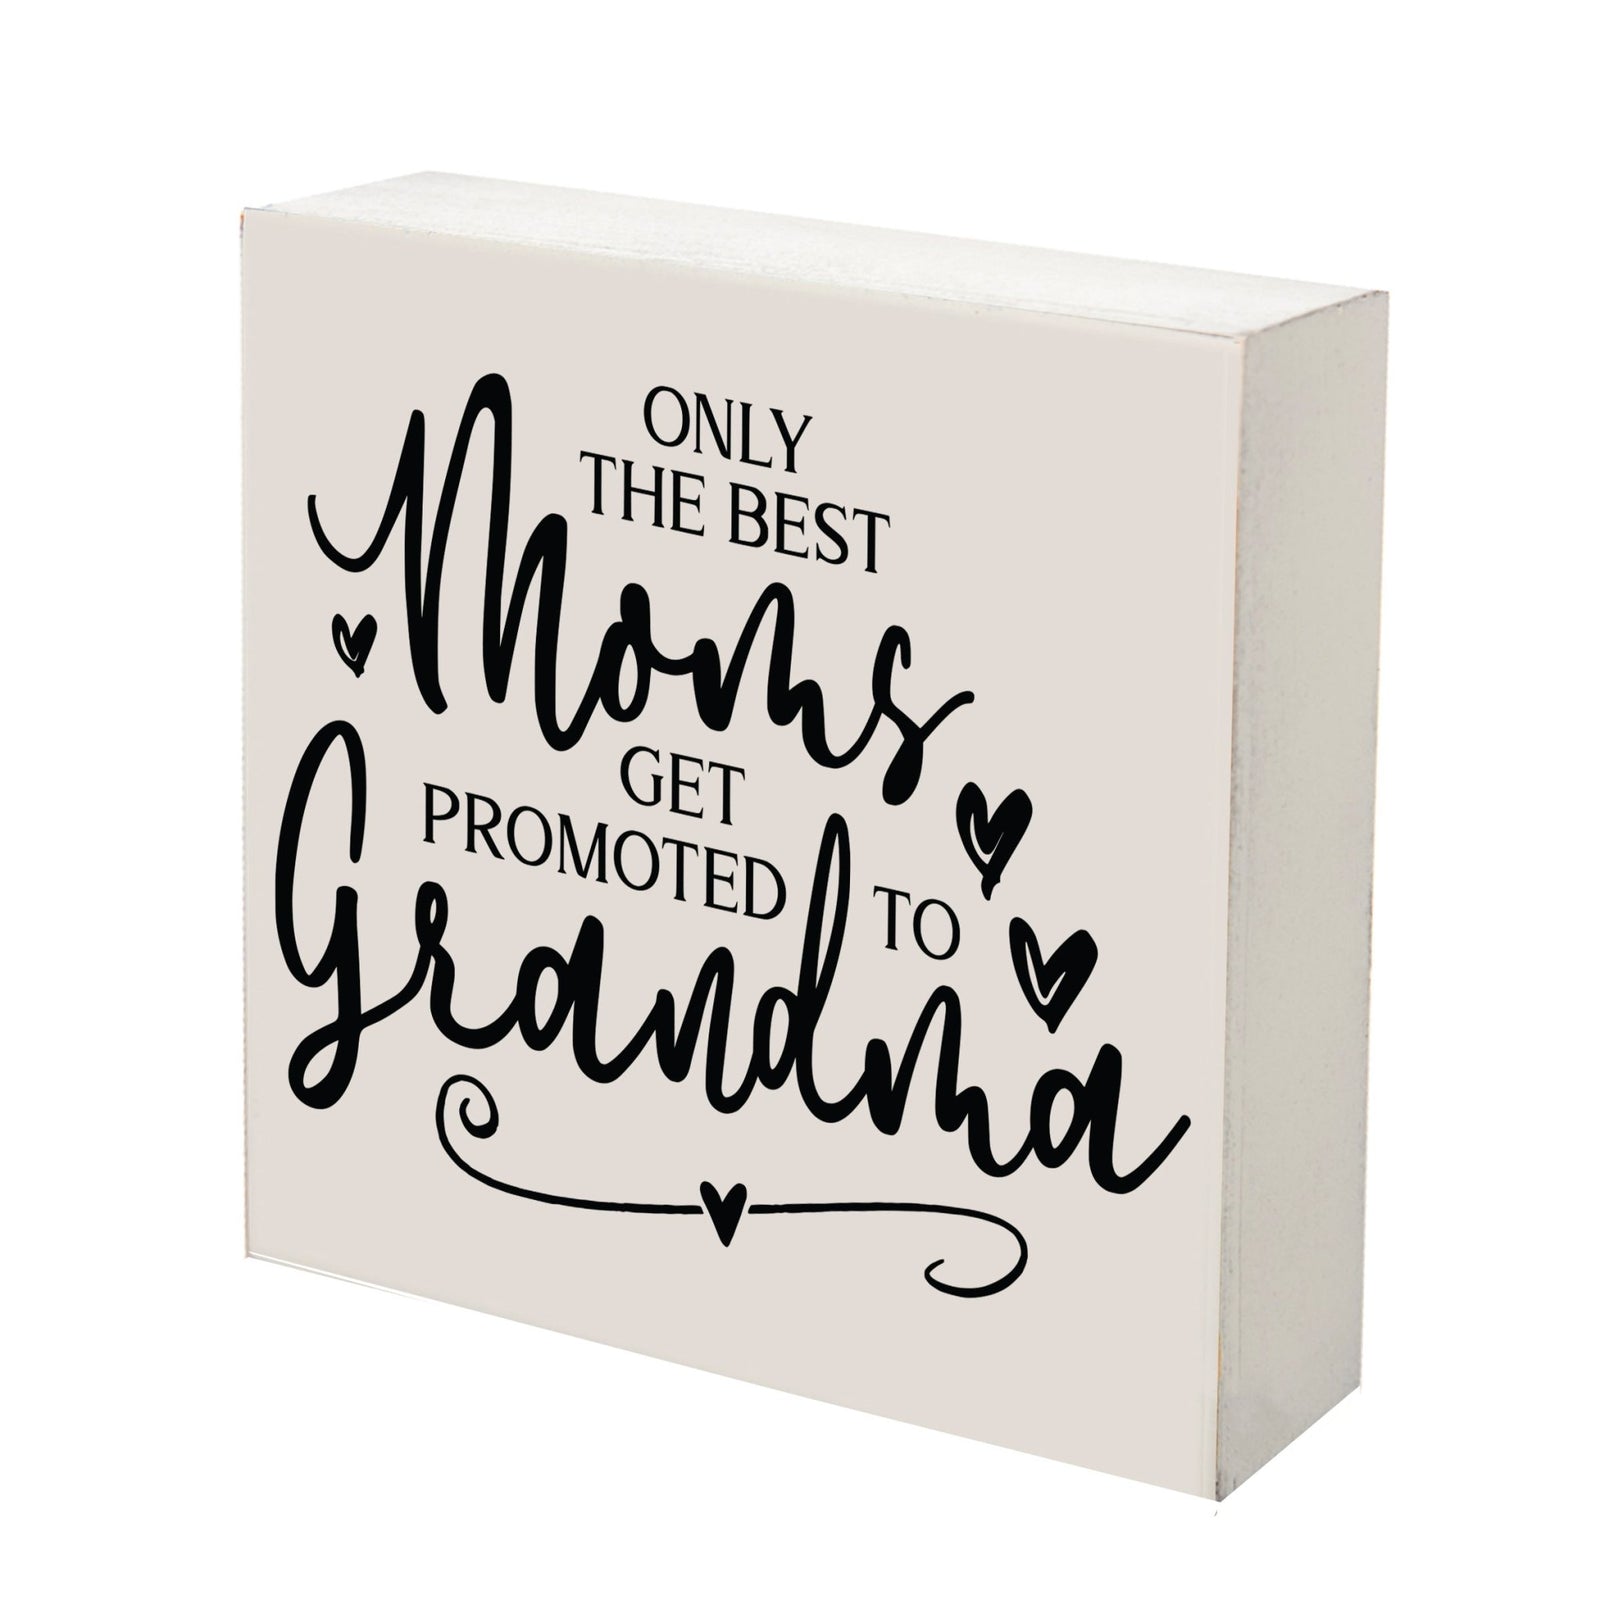 Modern Inspirational Shadow Box for Everyday Home Decorations For Mothers 6x6 - Only The Best Moms - LifeSong Milestones